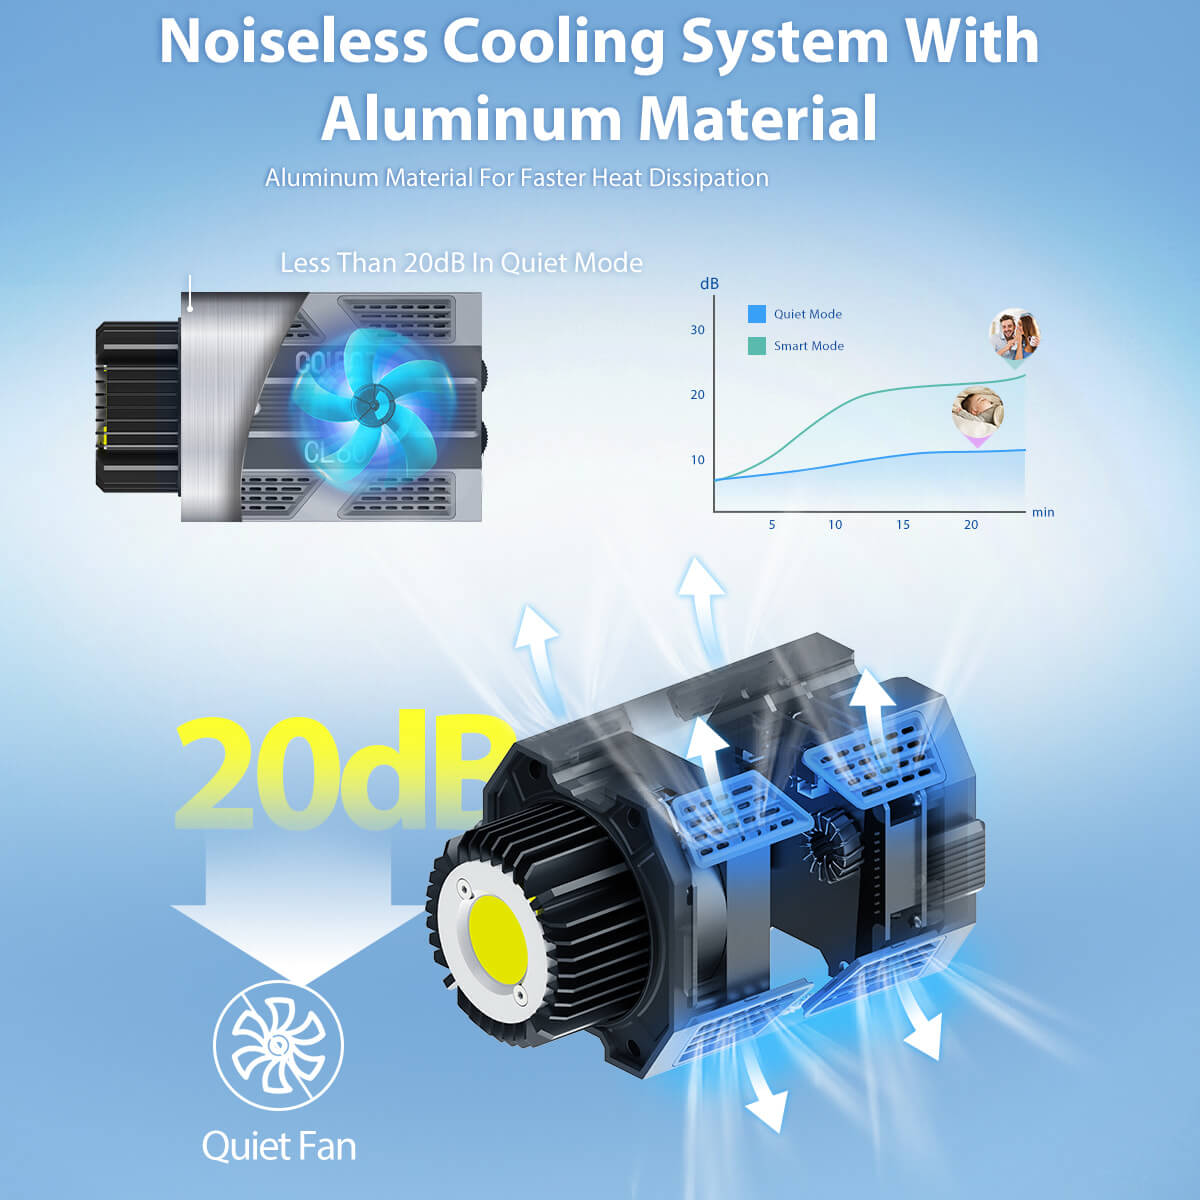 COLBOR CL60 has a noiseless cooling system with aluminum material, noise less than 20dB in quiet mode